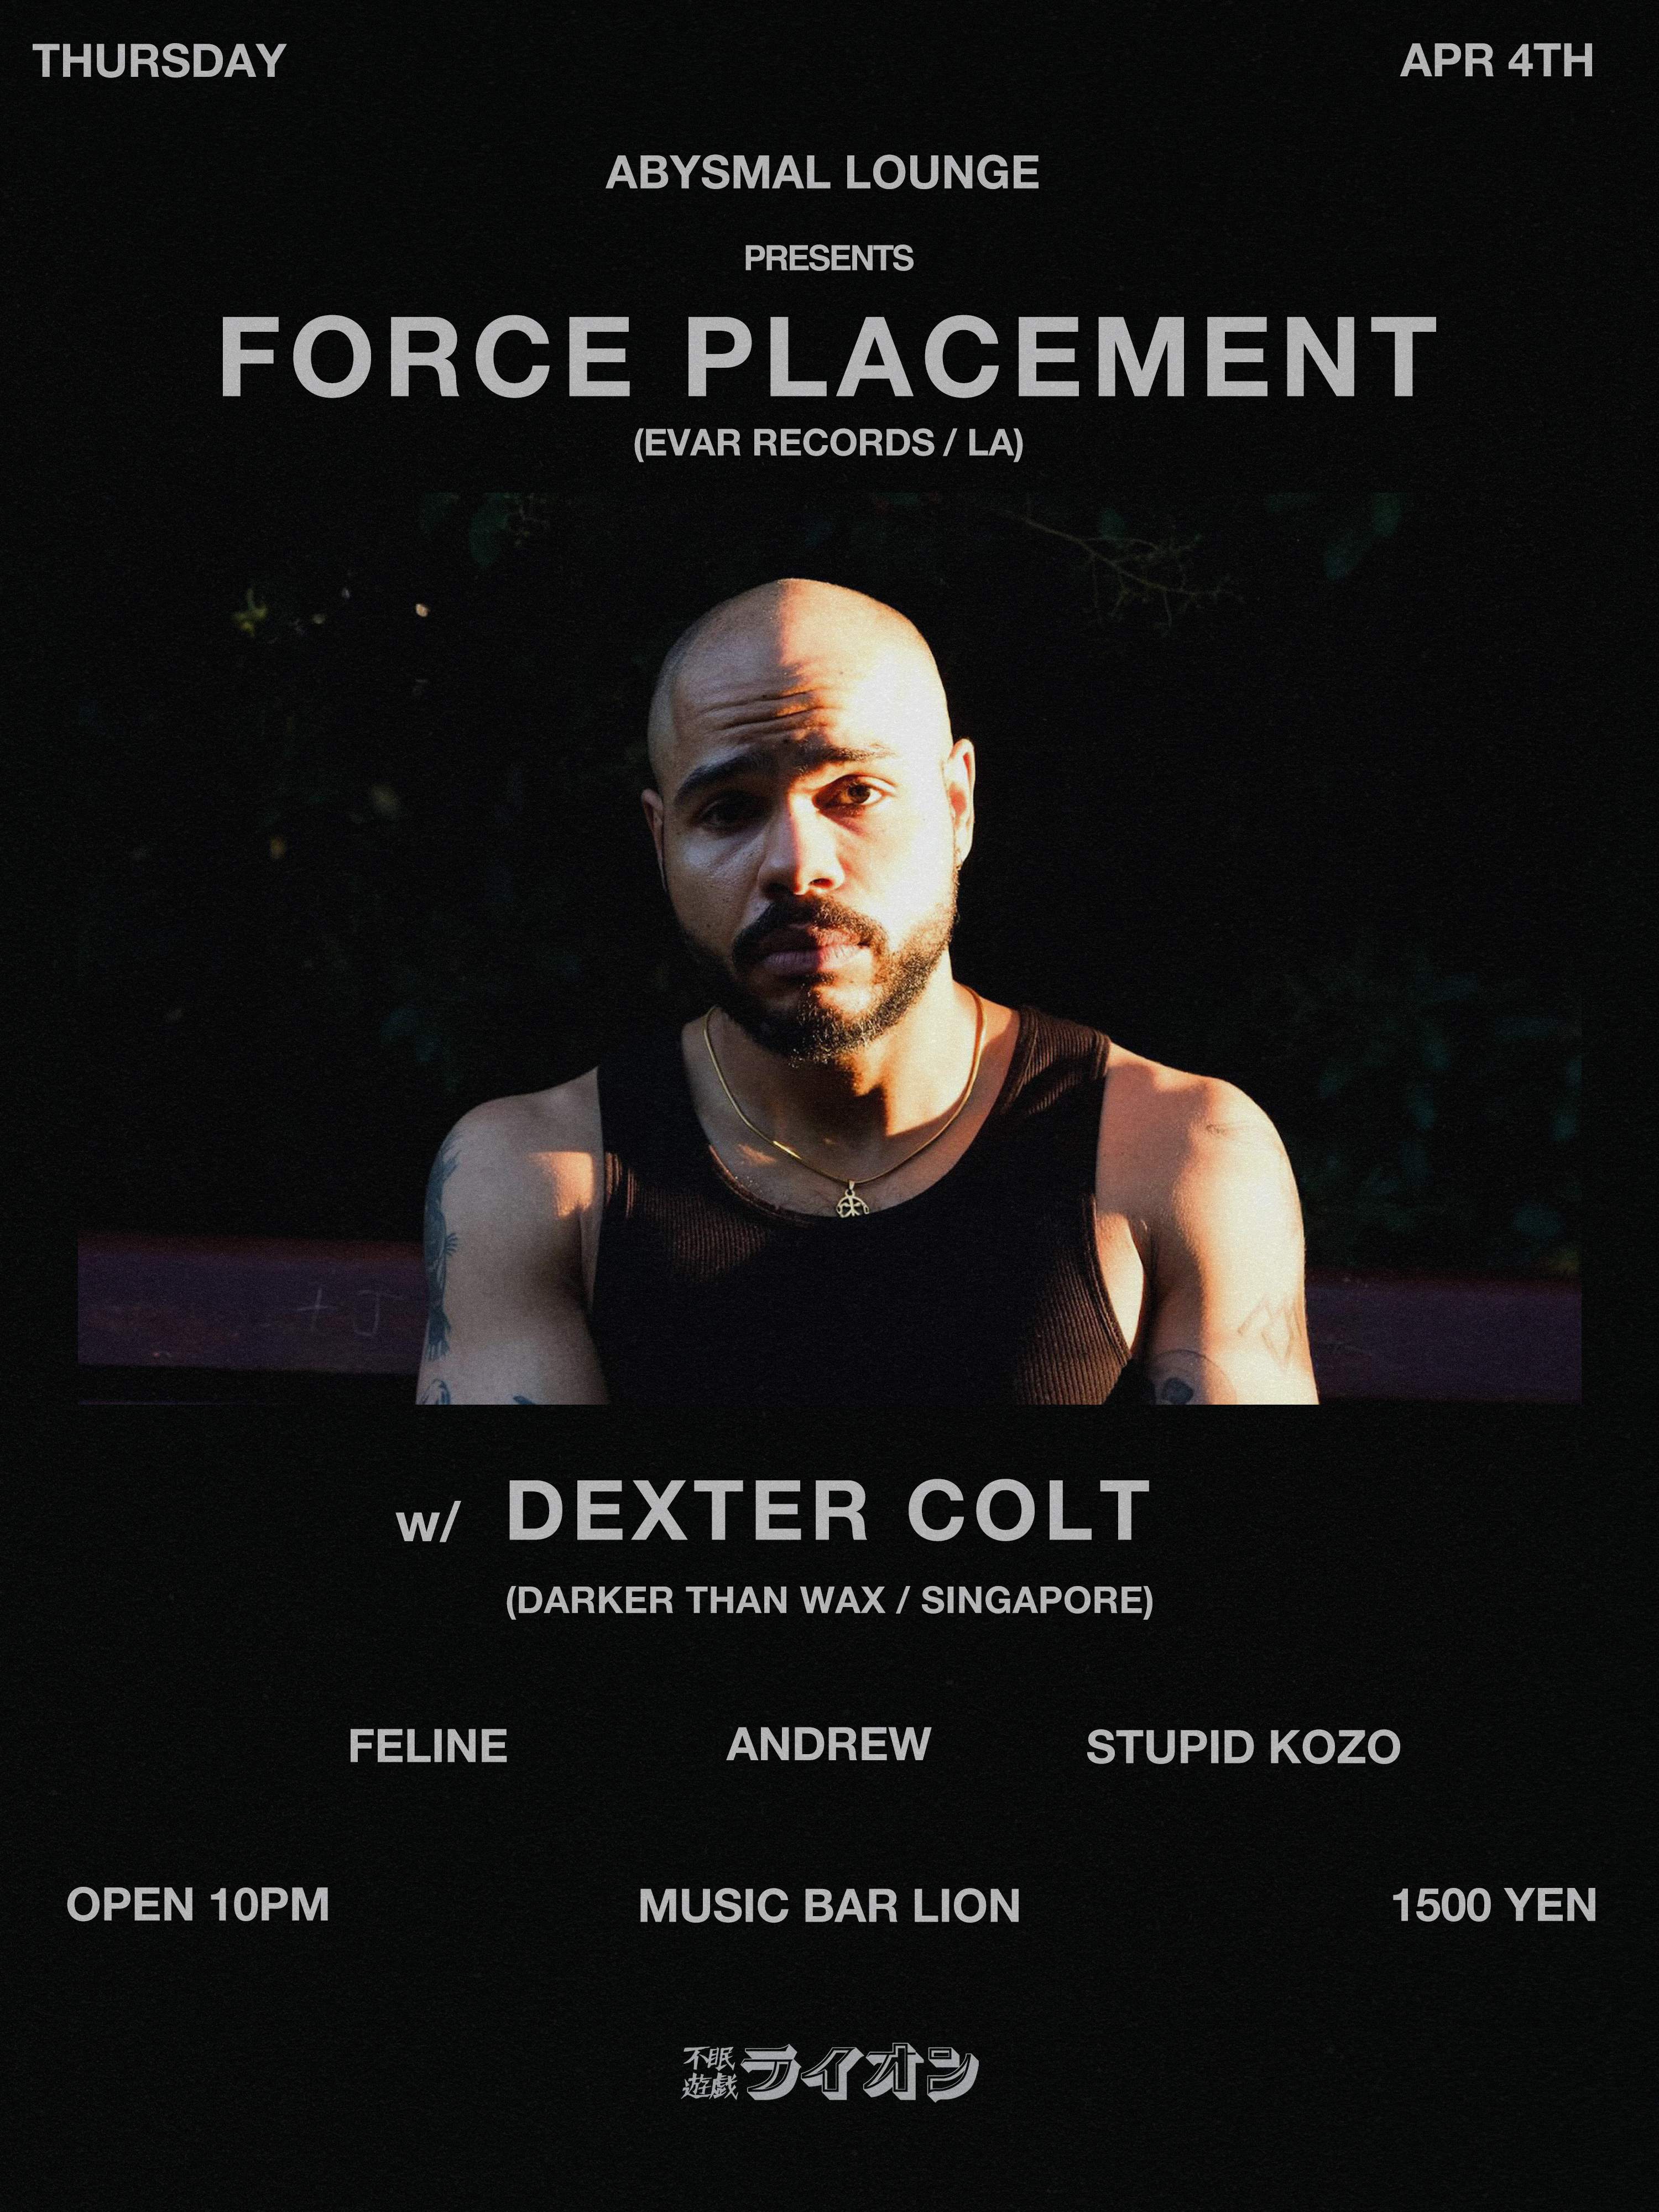 Abysmal Lounge presents Force Placement - フライヤー表